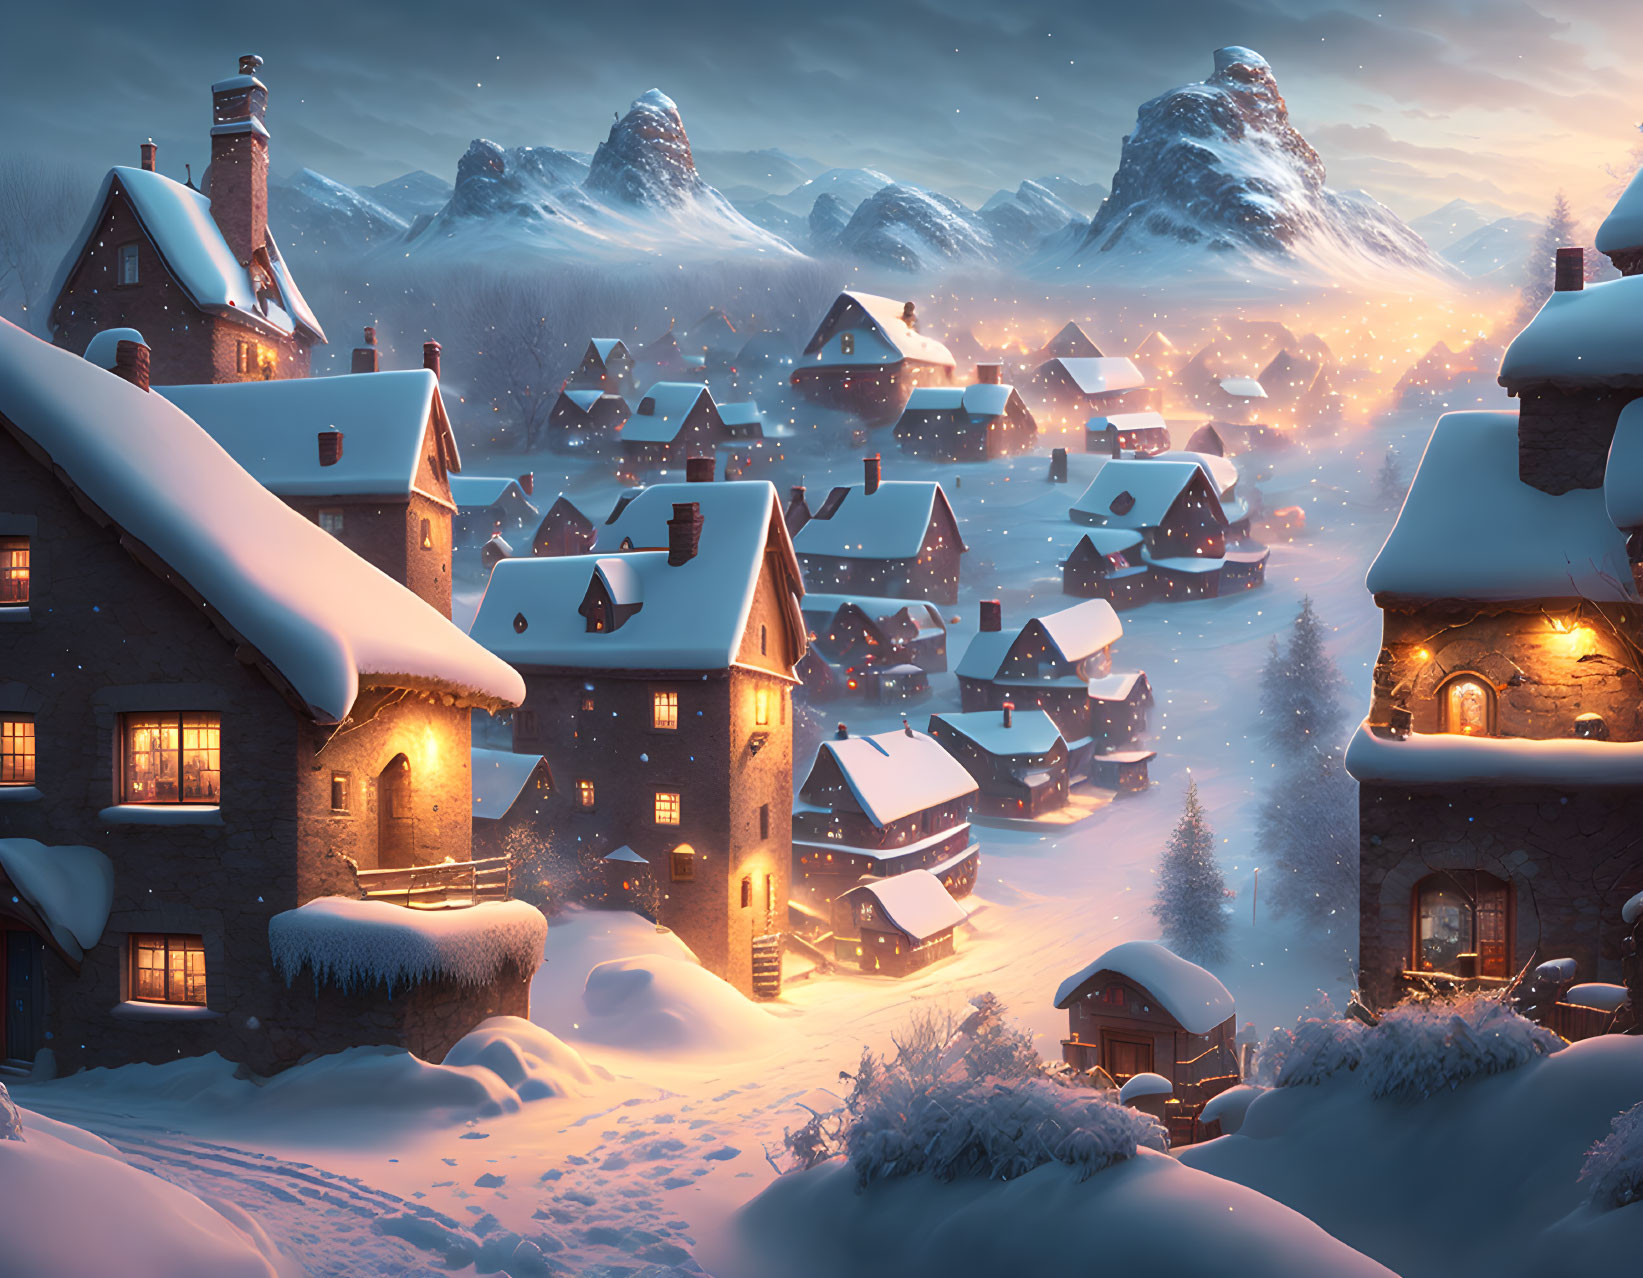 Snow-covered village nestled among mountains at twilight